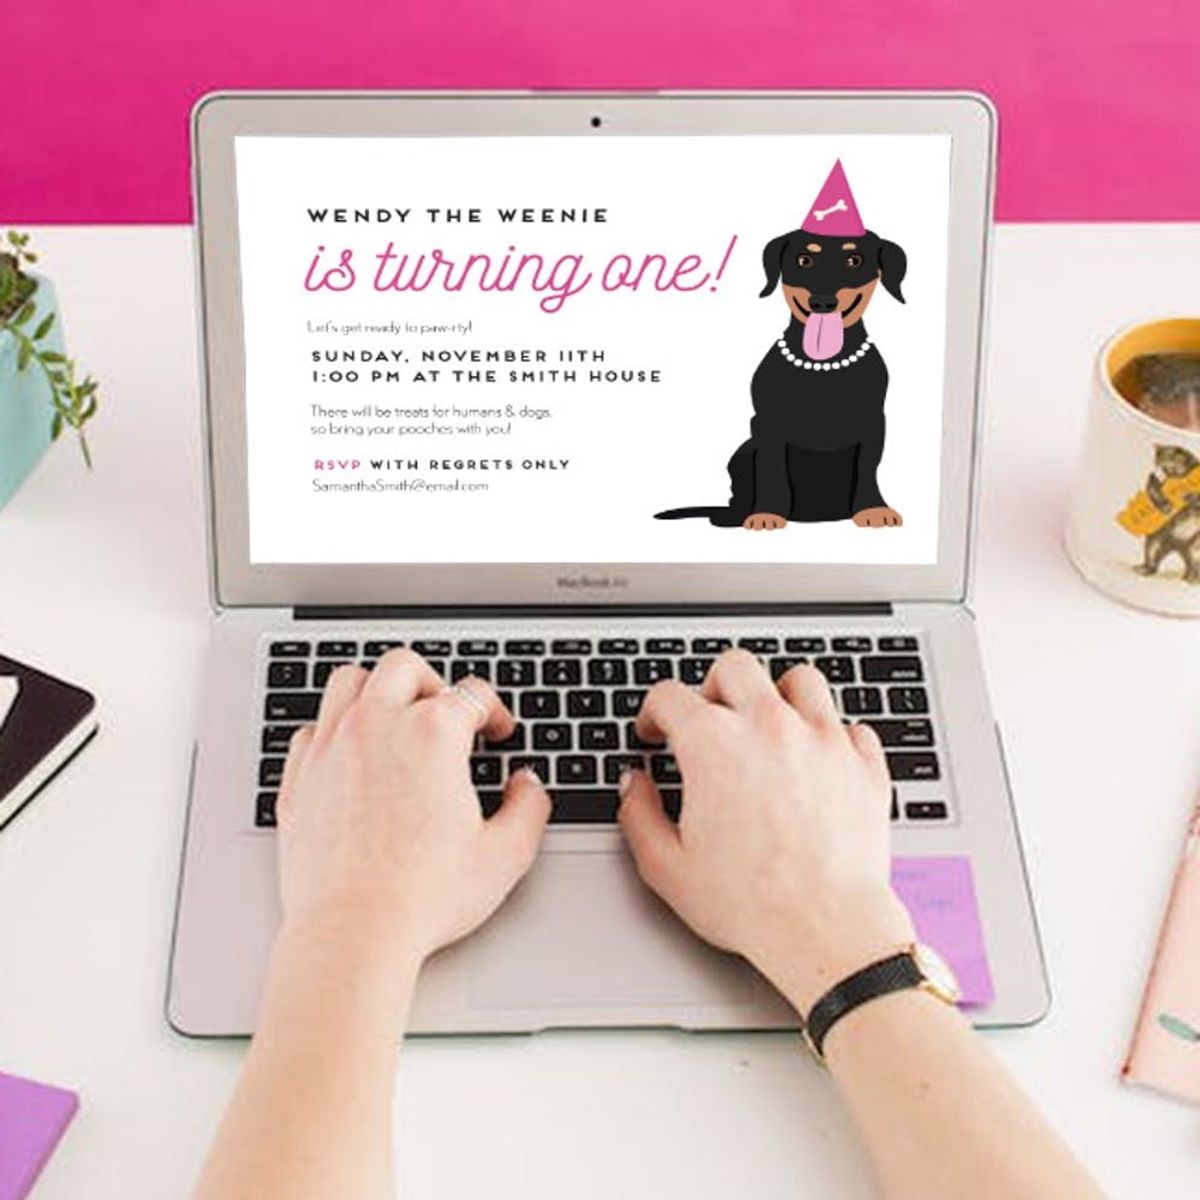 4 Elements of Typography You Should Consider When Designing (+ a Pet Birthday Invitation Template Inside!)